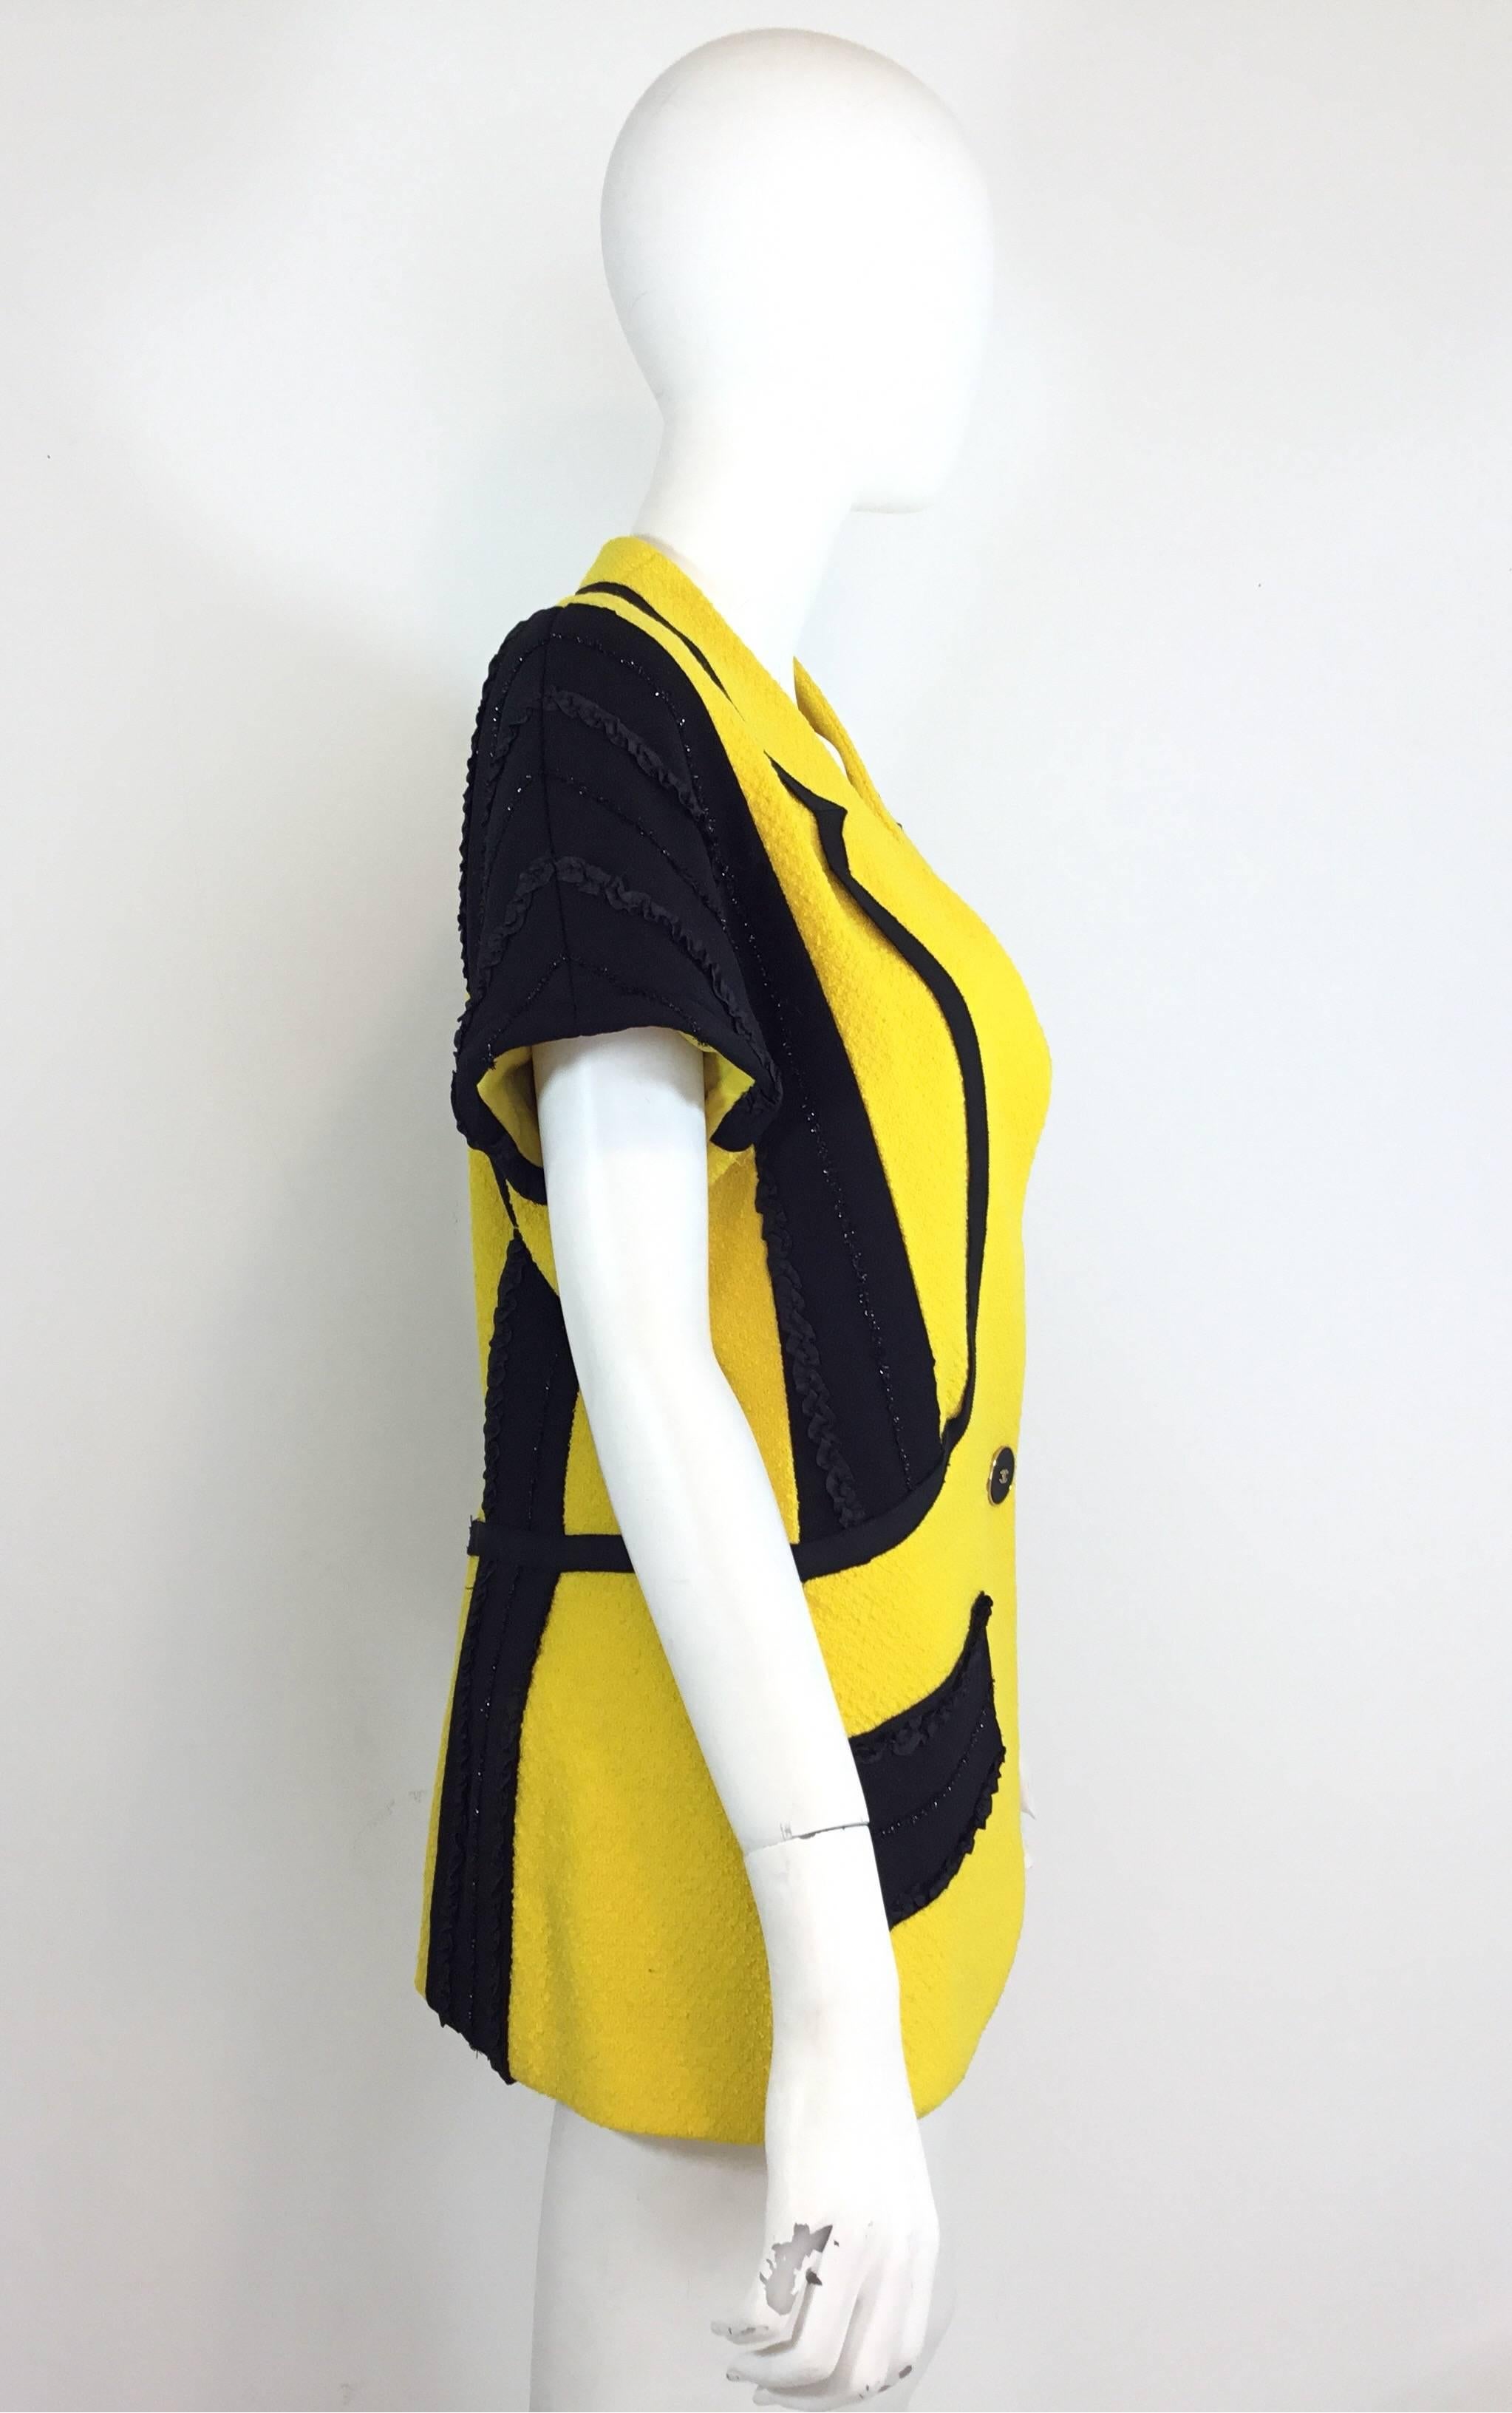 Chanel taxi cab yellow short sleeve jacket featured in yellow and black. Similar jacket is seen on Christy Turlington and Linda Evangelista in the ads for the collection. From collection 25, 1988. Jacket has one button fastening at the front center